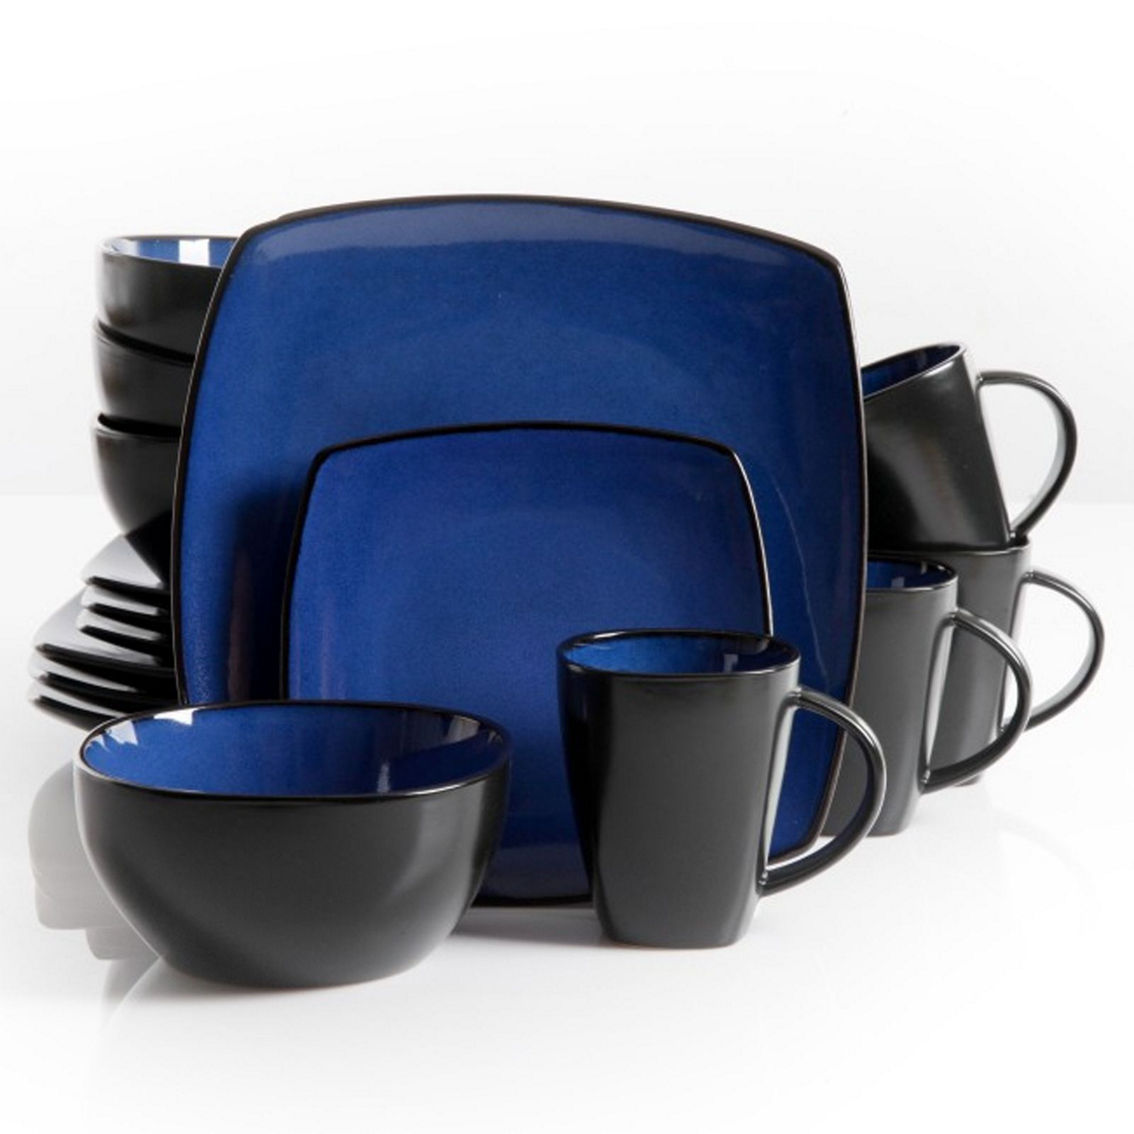 Gibson Soho Lounge 16 Piece Square Stoneware Dinnerware Set in Blue and Black - Image 2 of 5